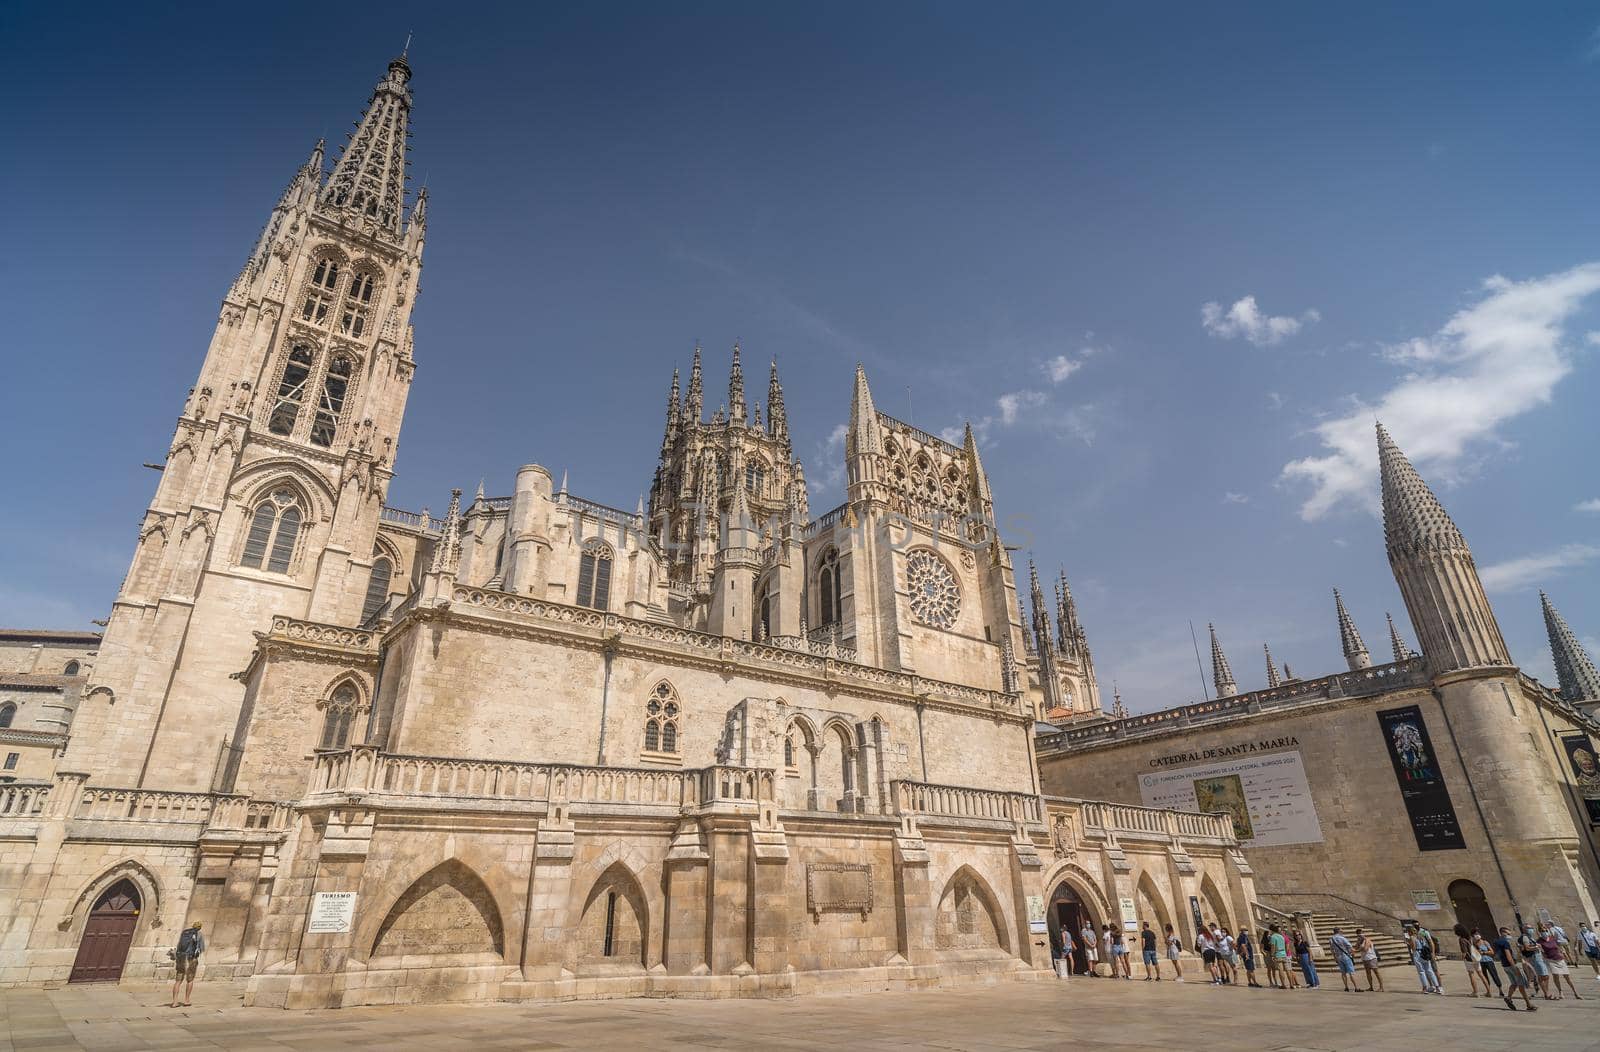 The Cathedral of Saint Mary in Burgos in Castilla y Leon, Spain.